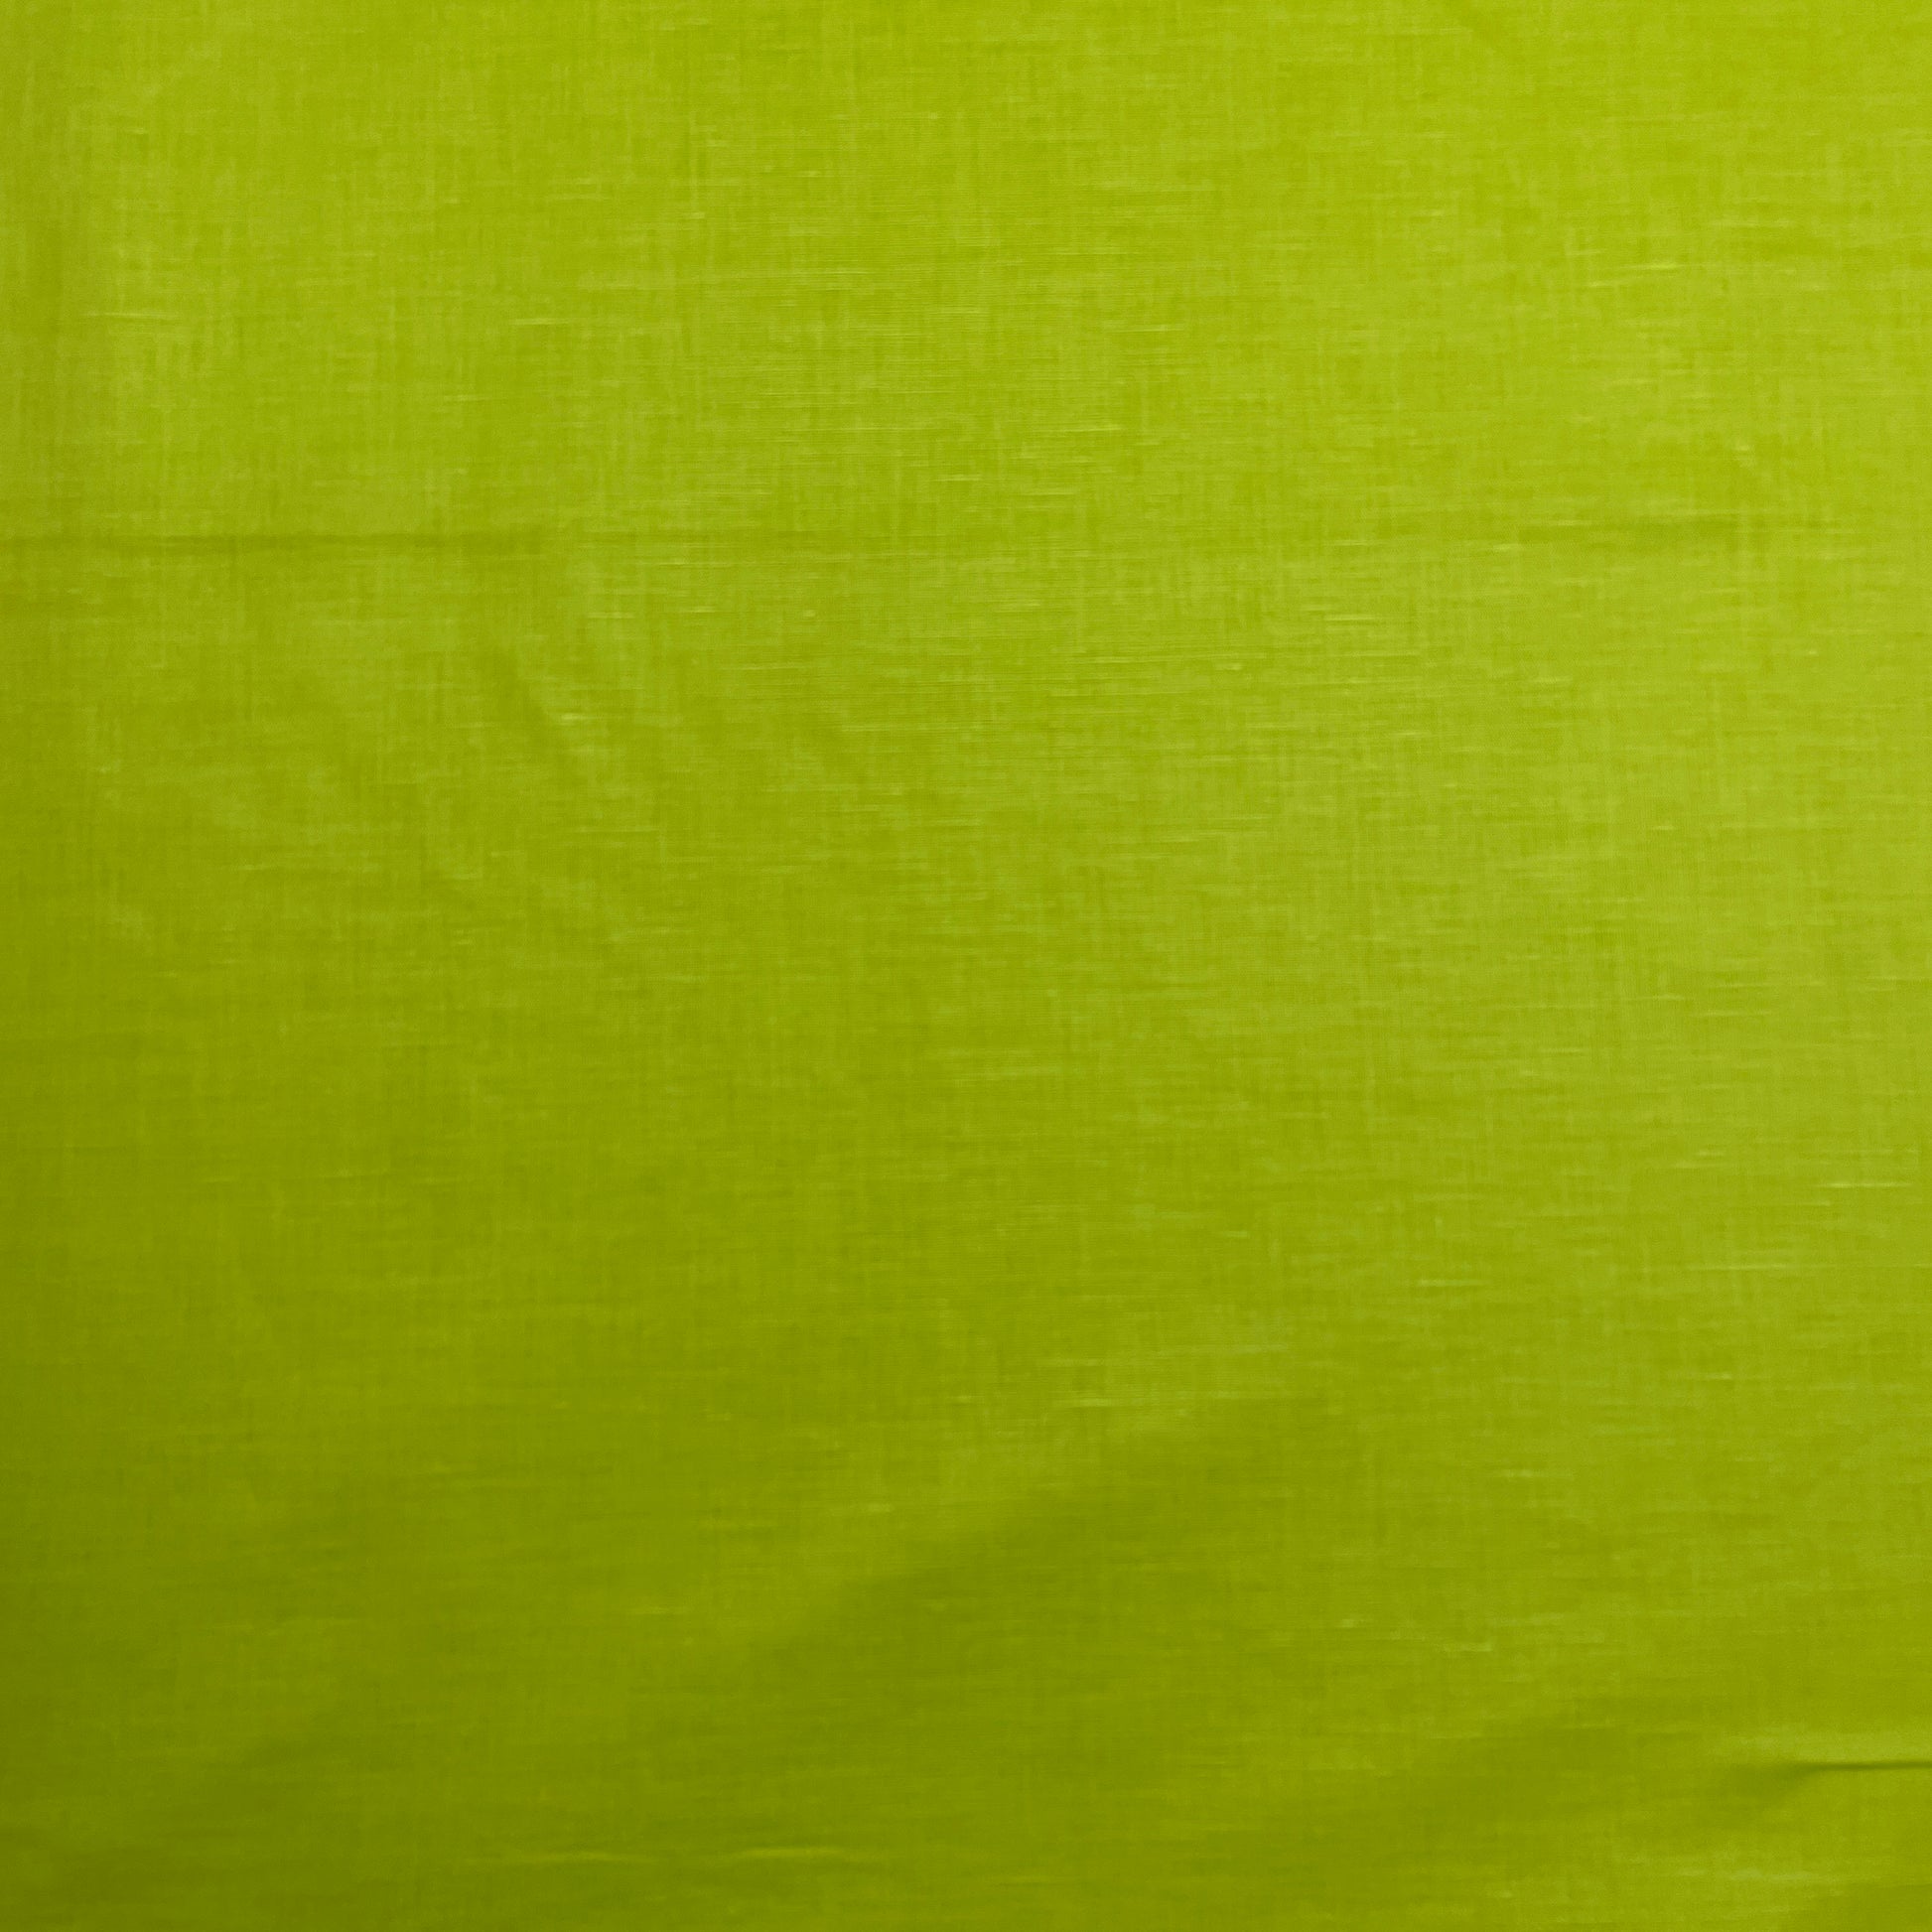 Lime Green Solid Cotton Linen Fabric - TradeUNO